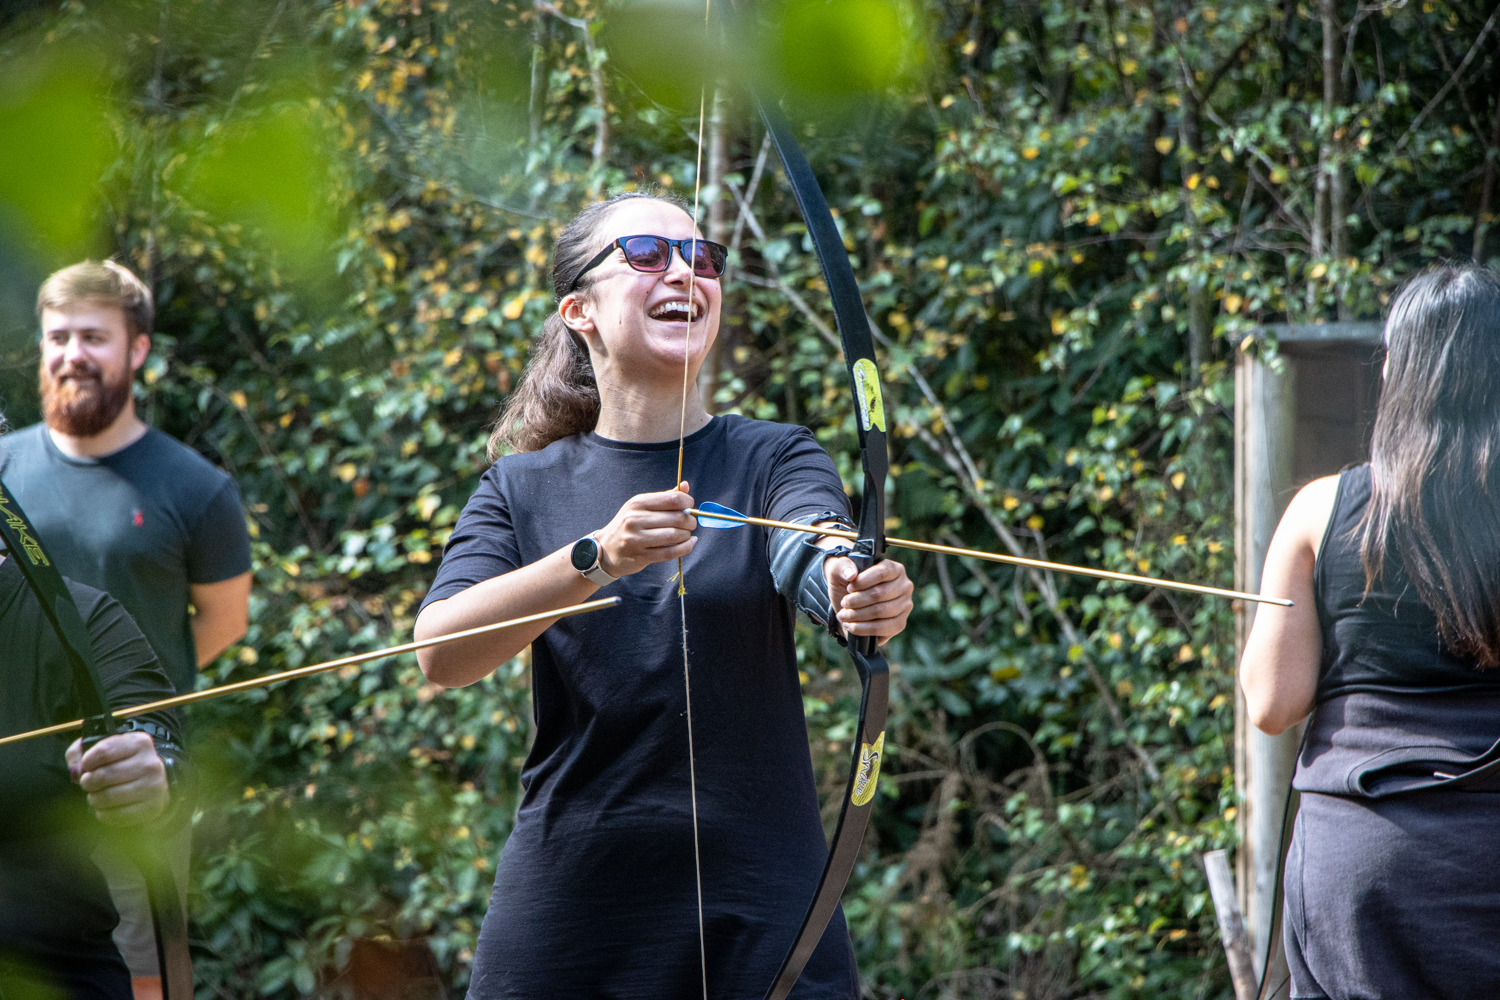 A lady trying her hand at archery in The New Forest